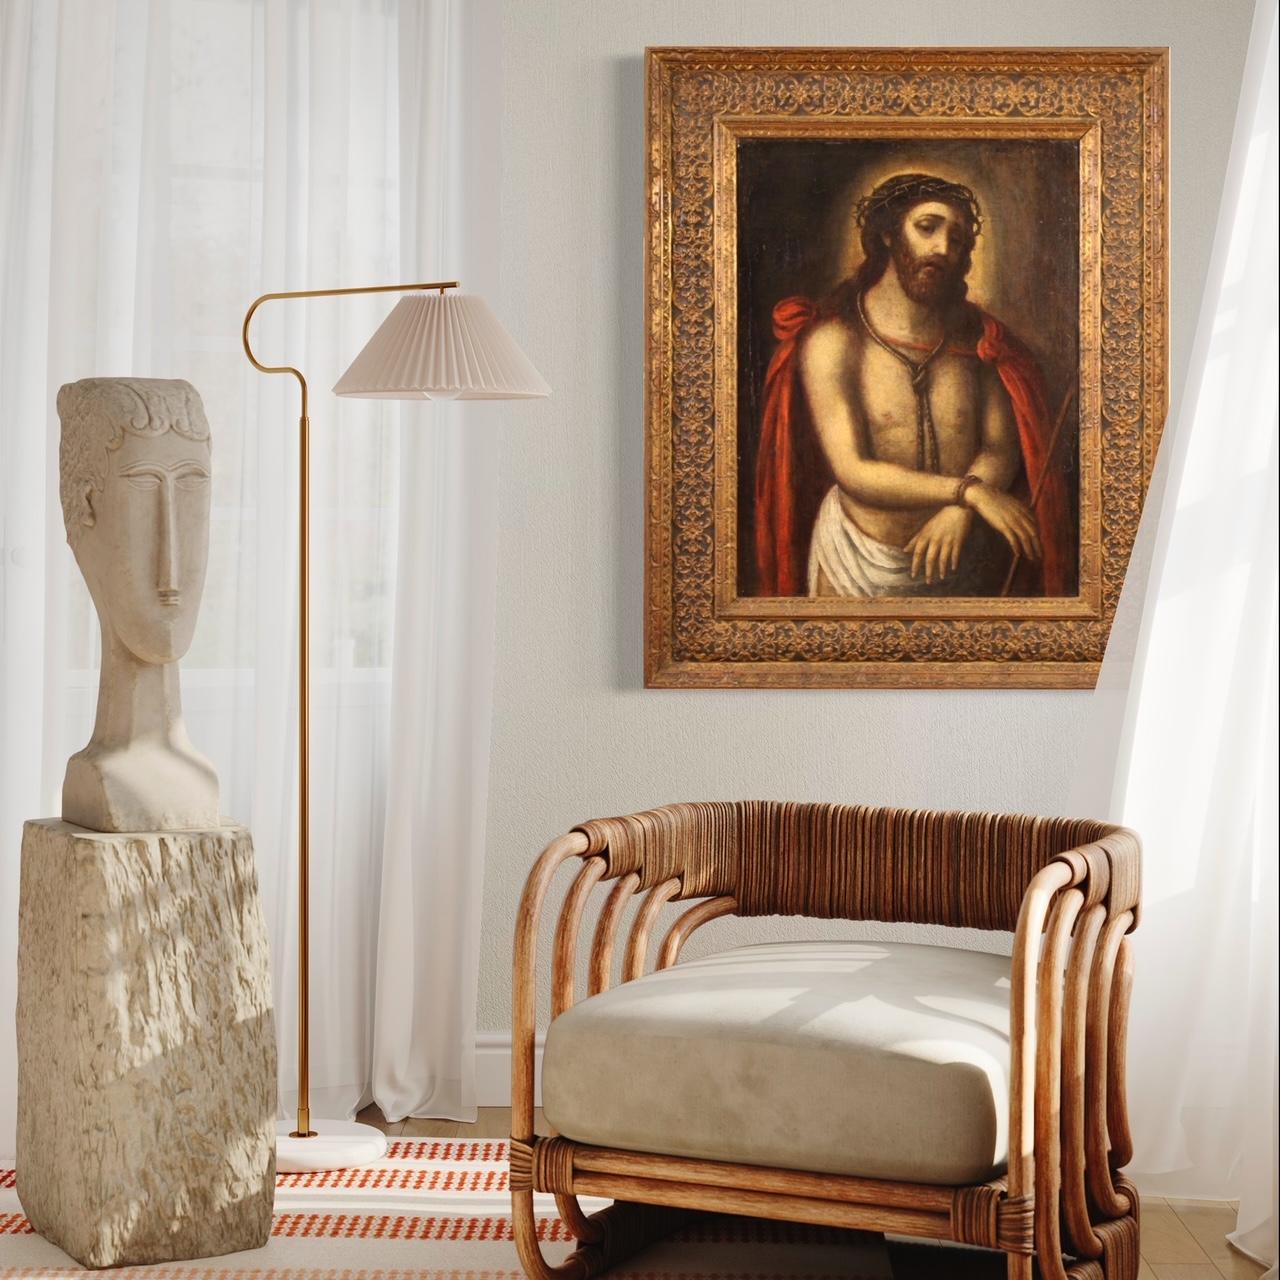 Antique Italian painting from the 17th century. Artwork oil on canvas depicting a religious subject, Ecce Homo, of good pictorial quality. Painting adorned with a splendid 20th century frame, in wood and plaster, carved, lacquered and gilded with